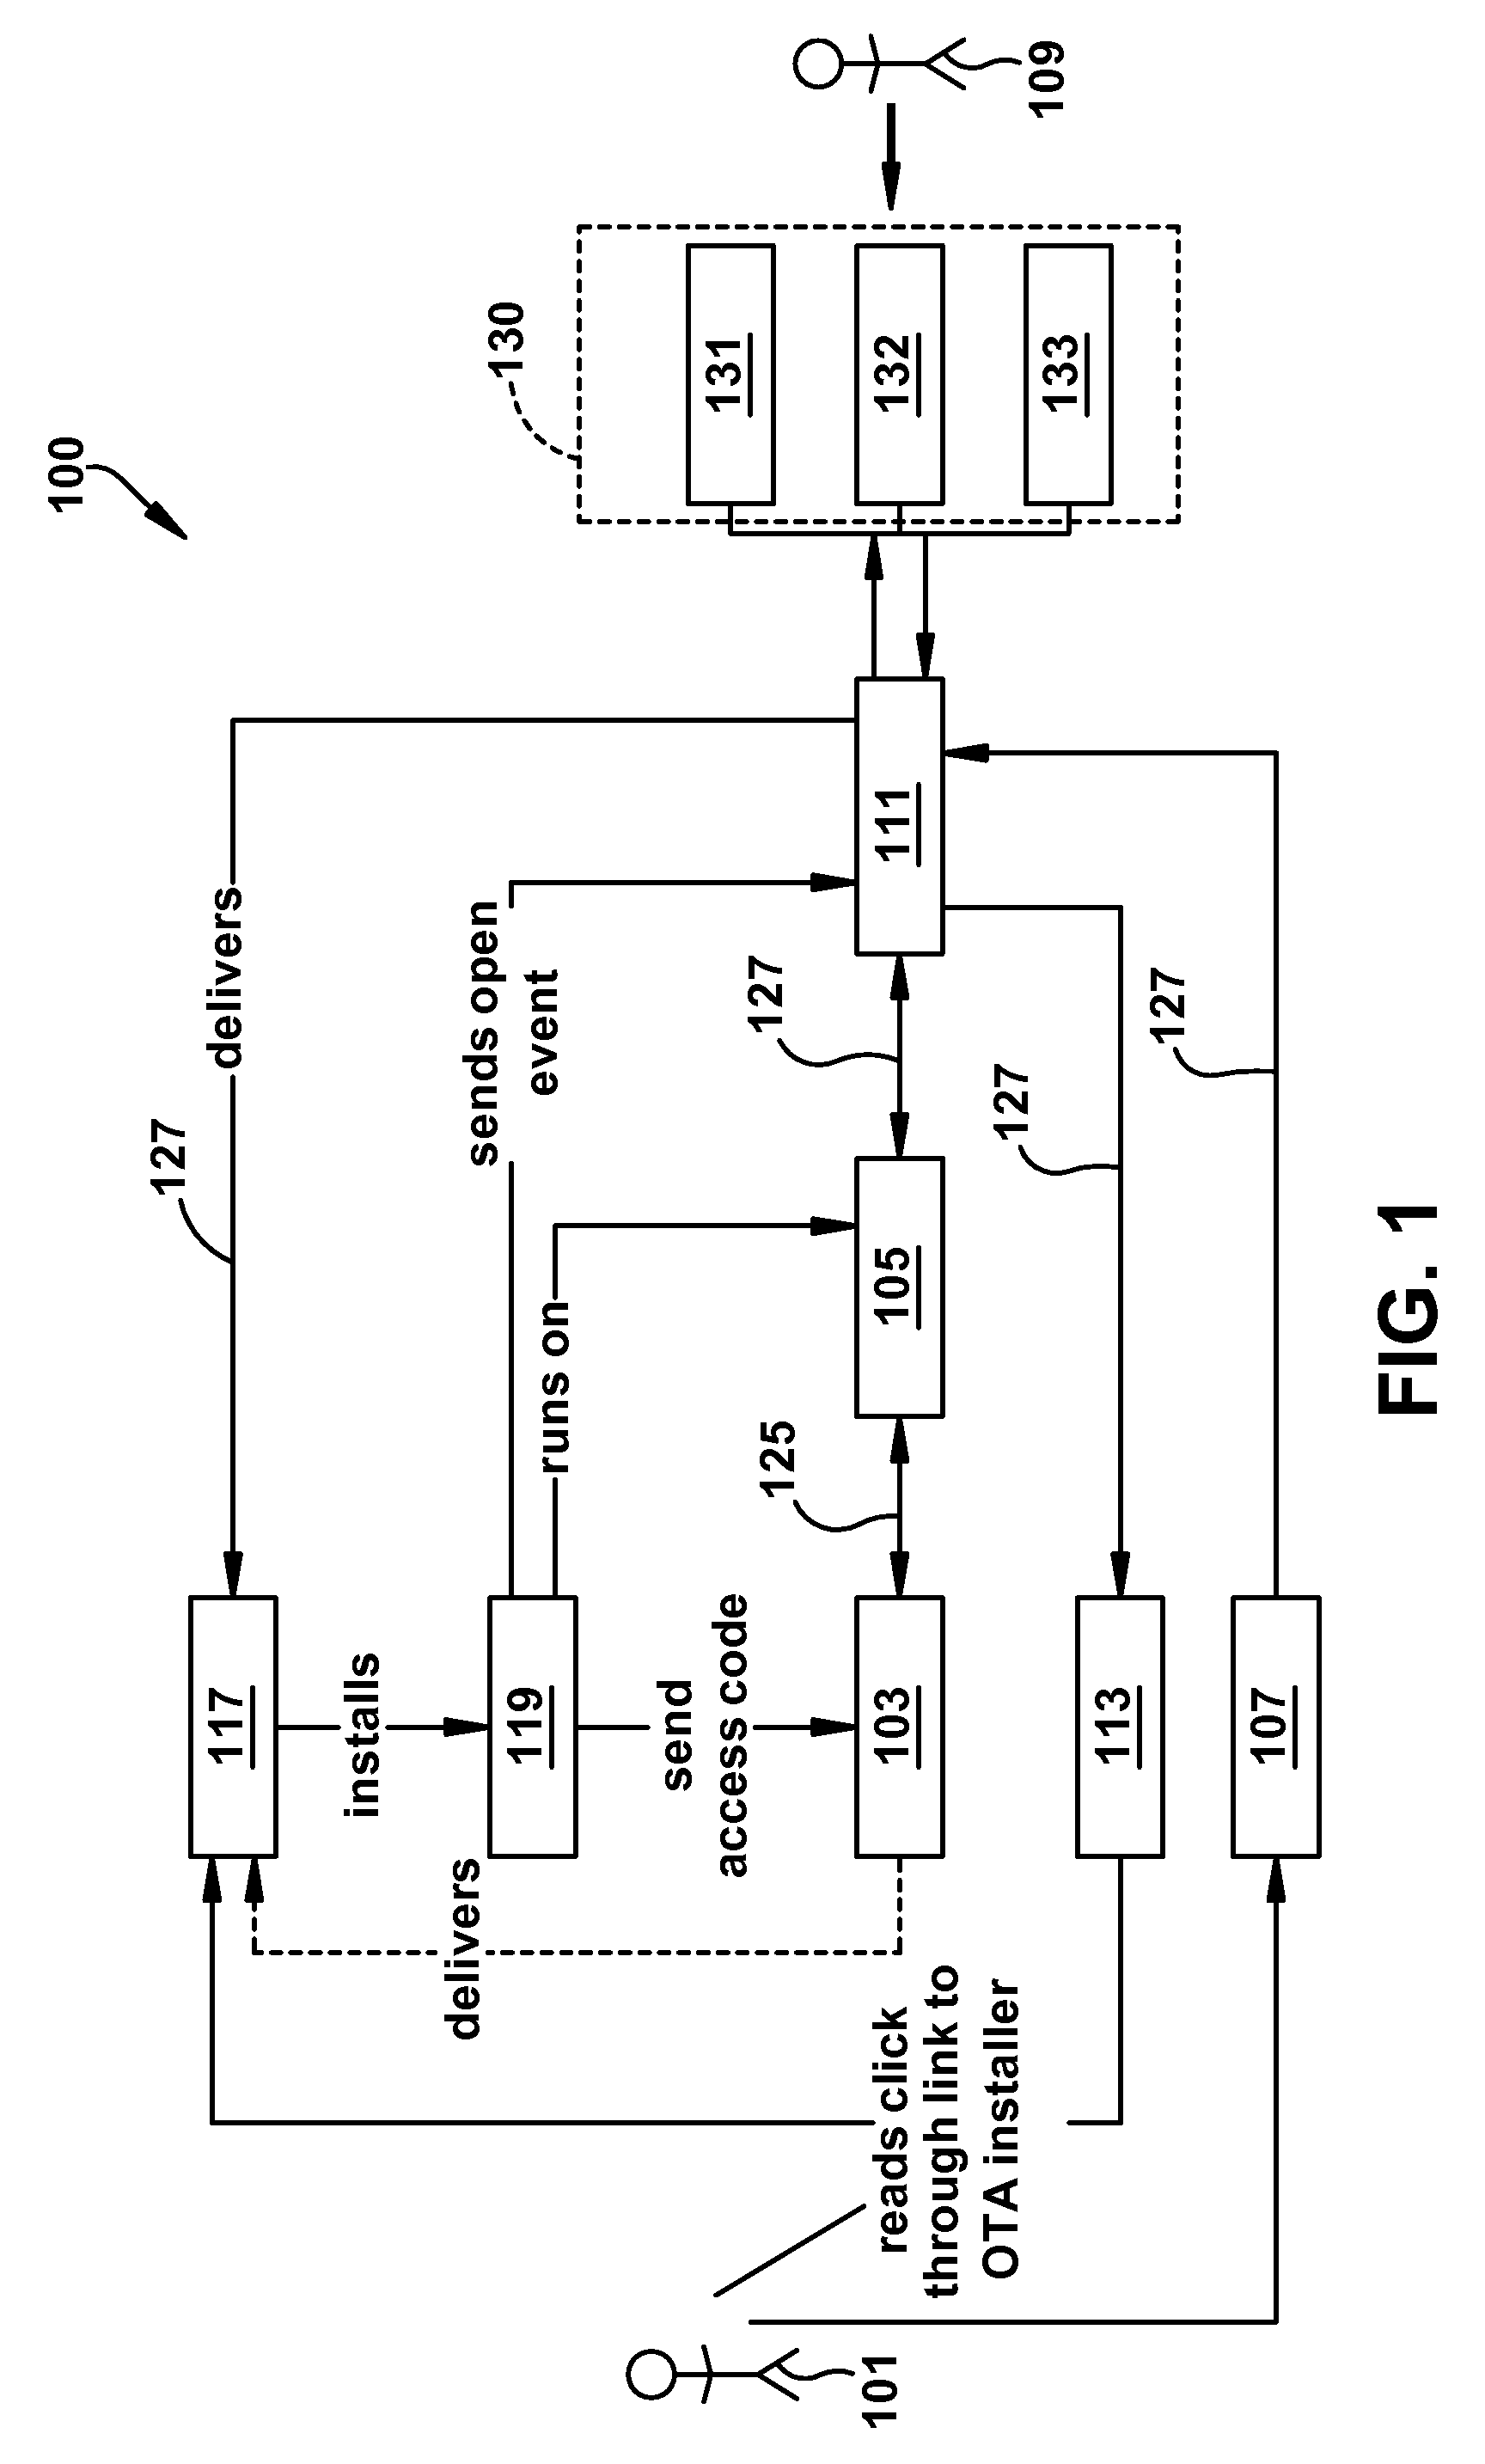 One-time access for electronic locking devices